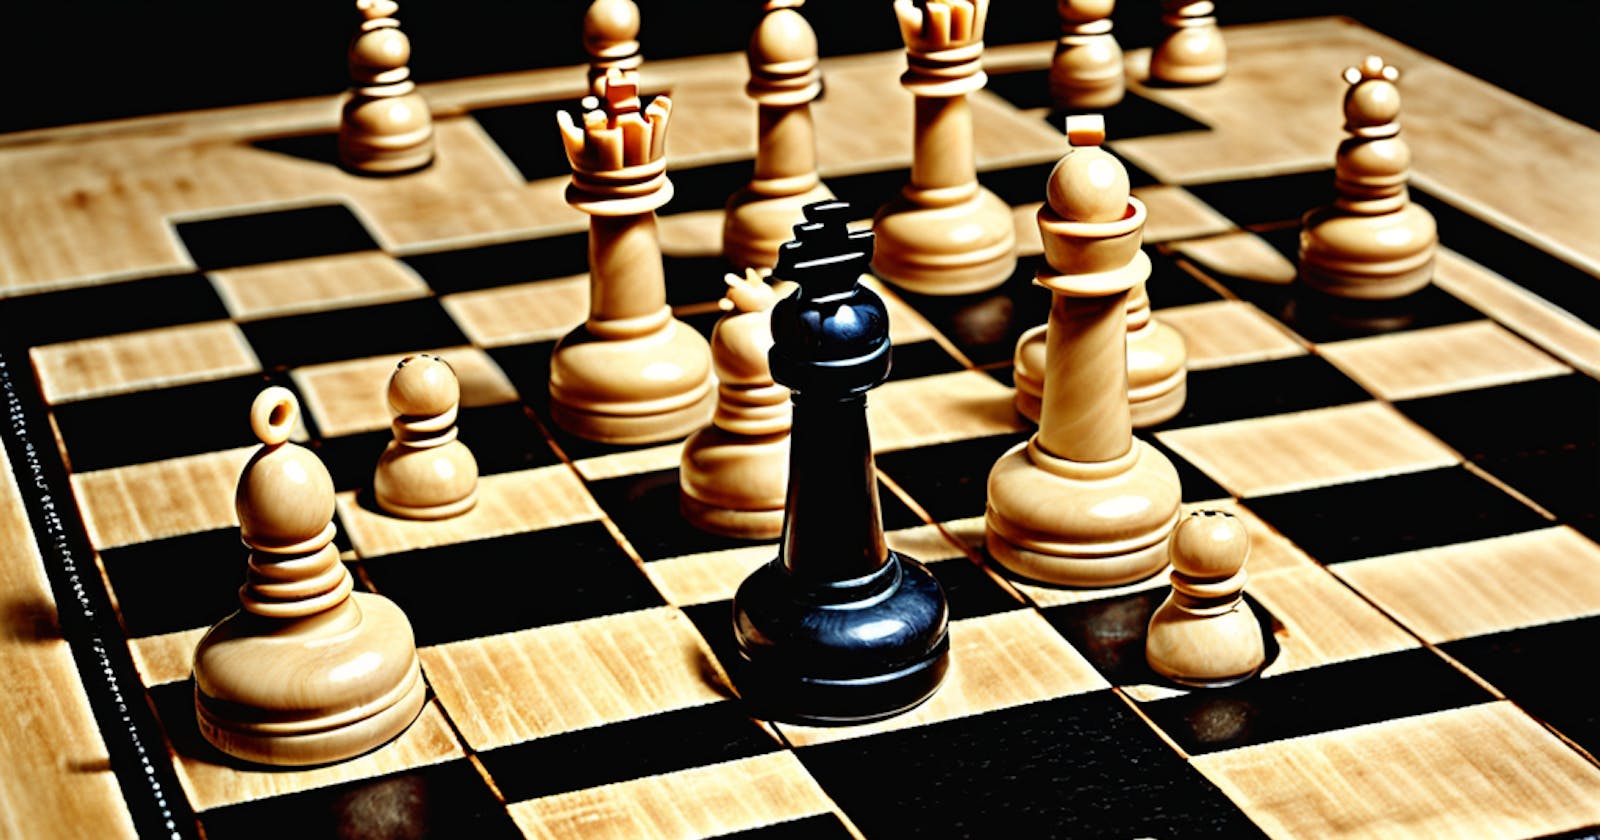 ChatGPT vs. Stockfish: The Battle of AI in Chess